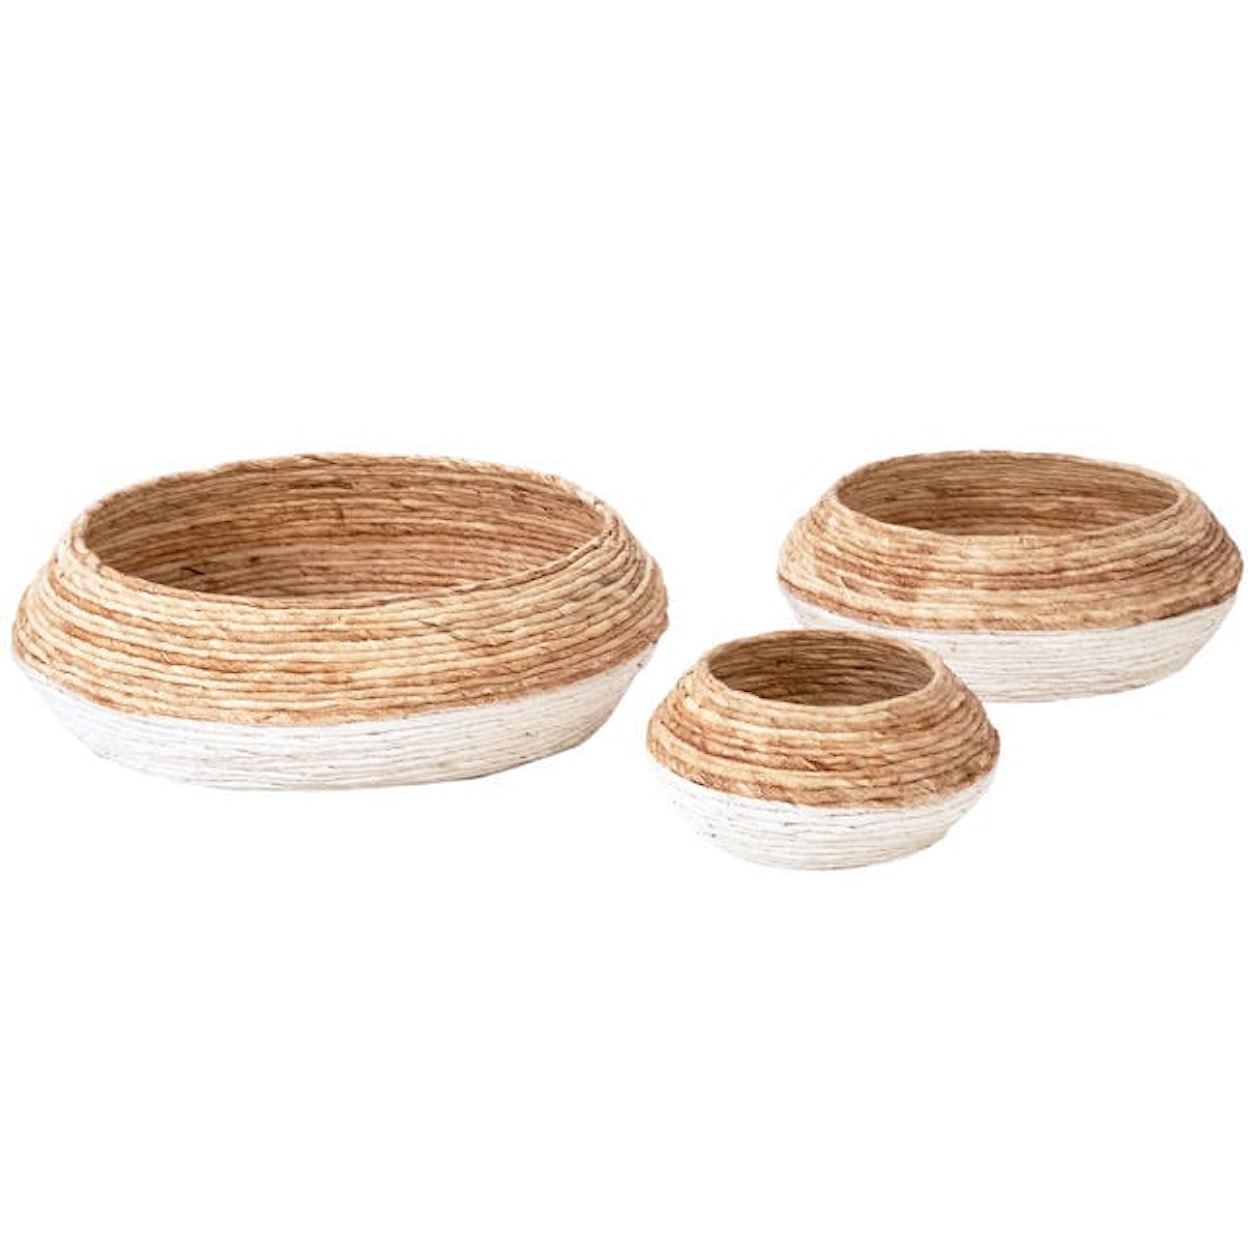 Dovetail Furniture Accessories Abaca Basket Set Of 3